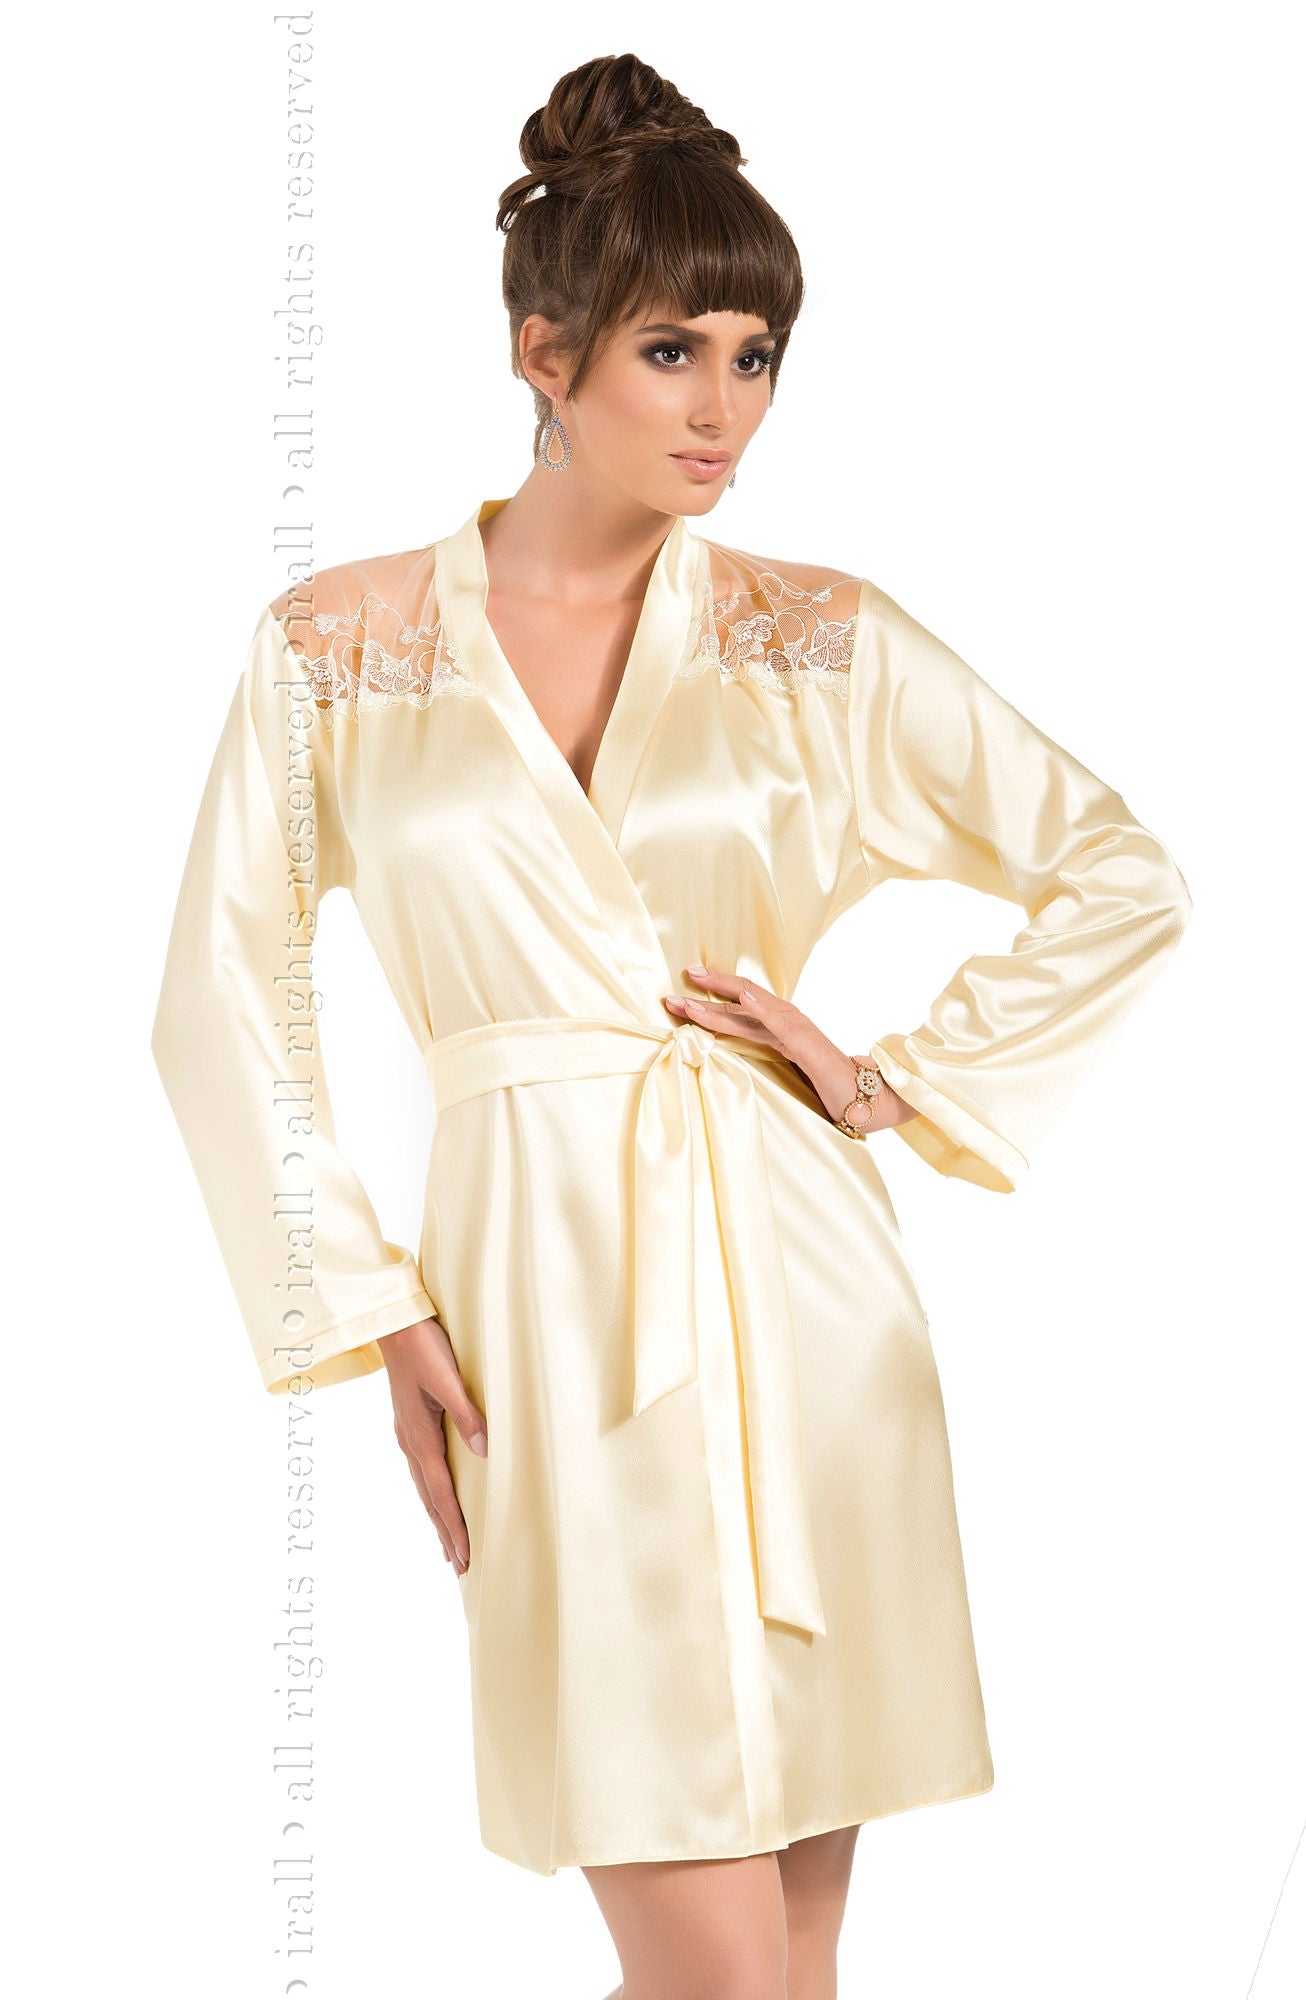 Irall Daphne Dressing Gown  Brands, Bridal, Dressing Gowns, Irall, NEWLY-IMPORTED, Nightwear, Robes - So Luxe Lingerie